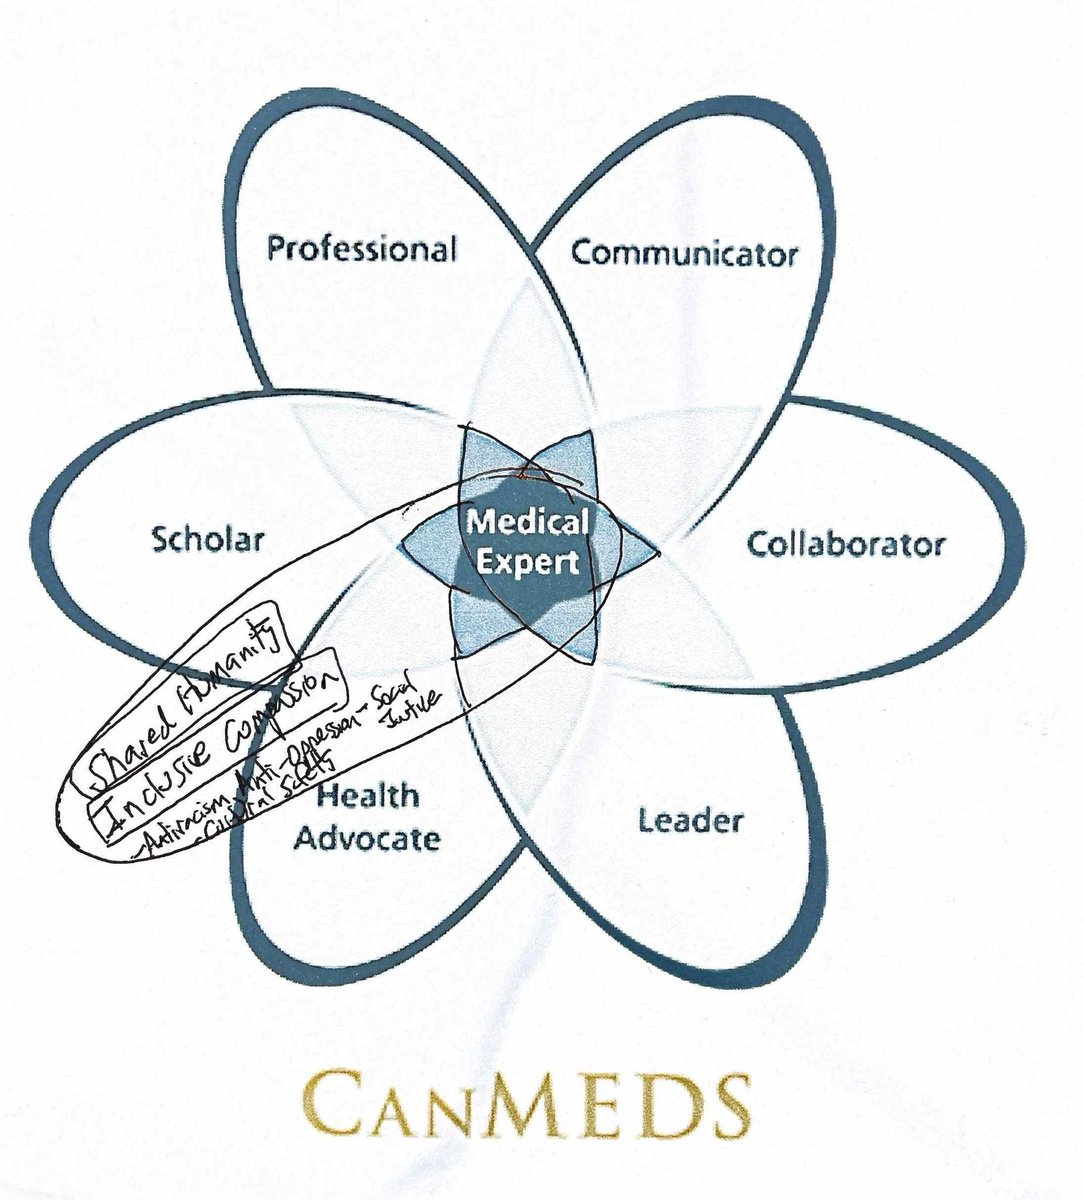 After 23 years of work with vulnerable populations globally, much social advocacy and practise from minor ailment to extremis, I agree CanMEDS needs adjustment with the centrality of MD as Medical Expert. My model is not as educational expert but as regular MD. @Royal_College